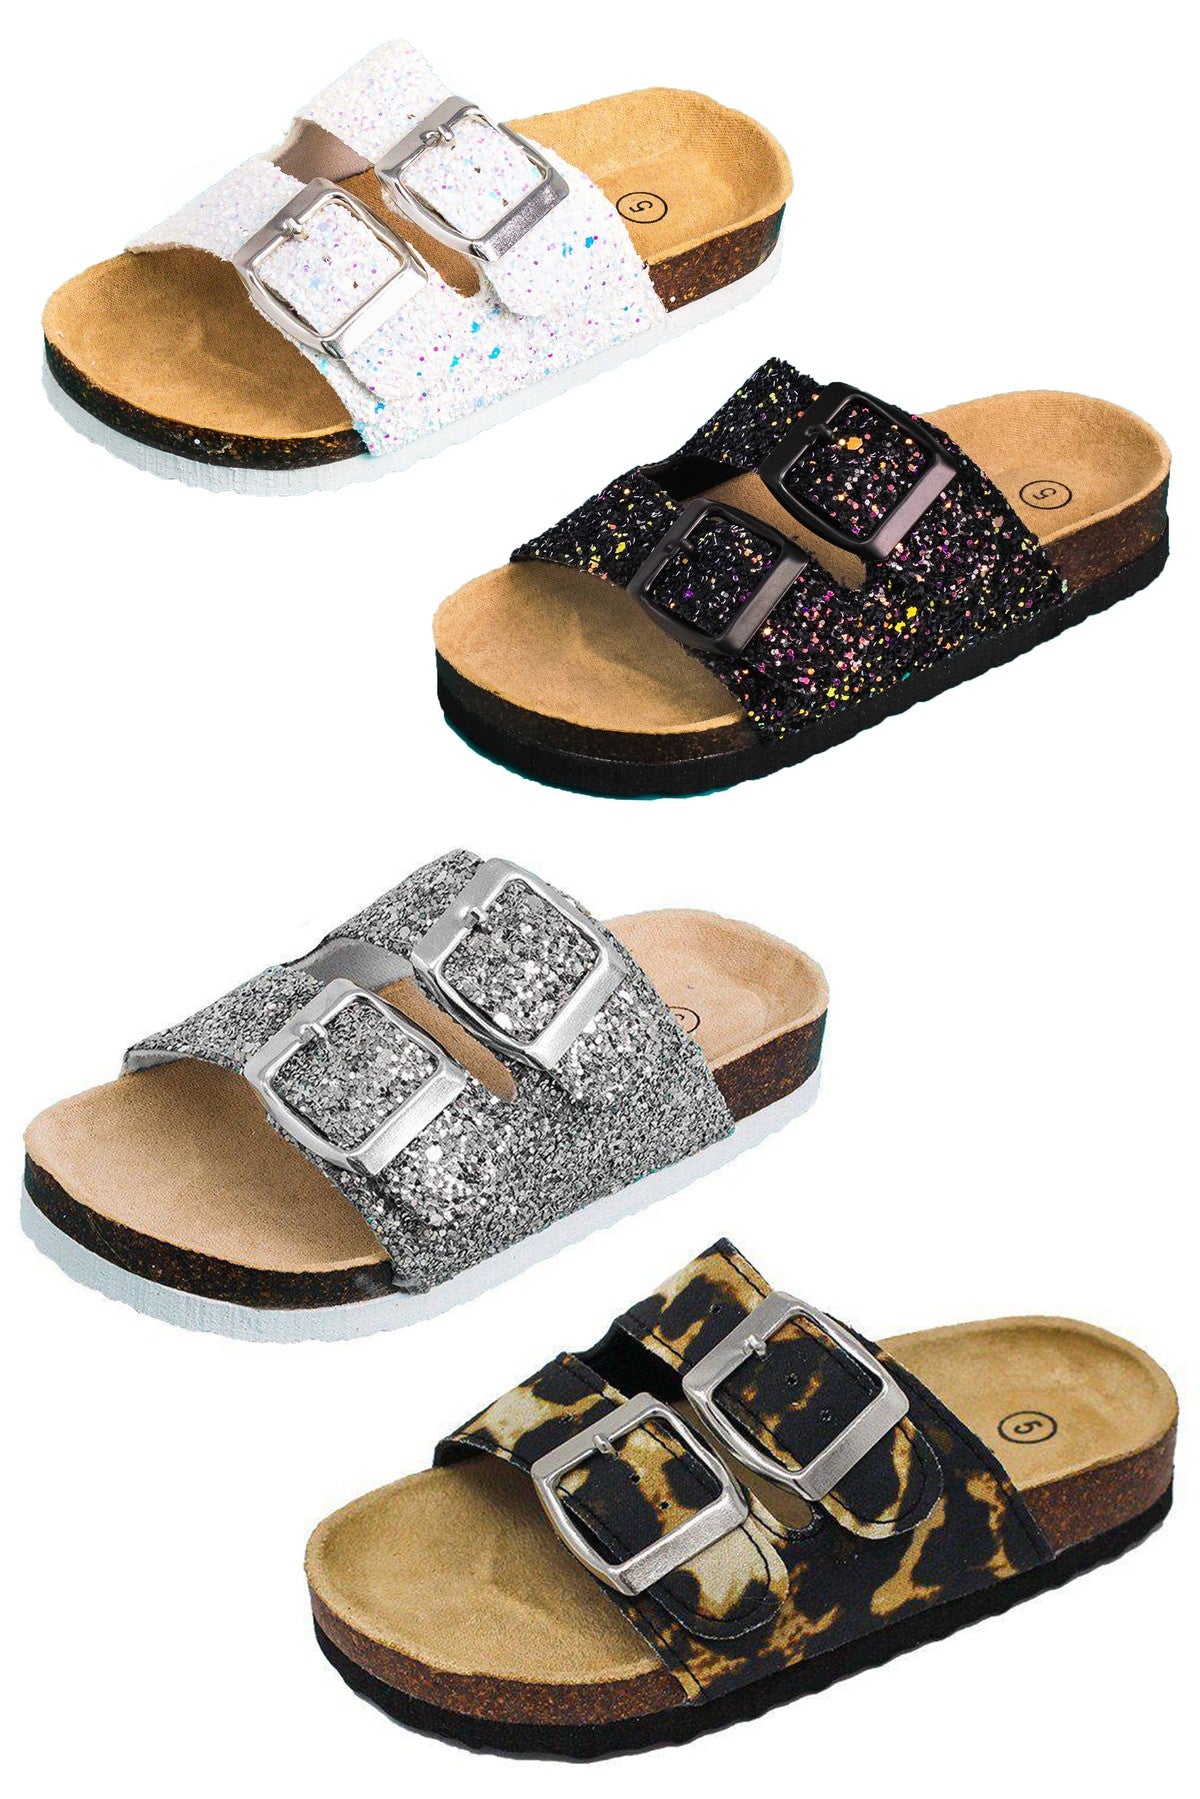 Mom & Me - Birkley Sandals - Many Colors! - Sparkle in Pink